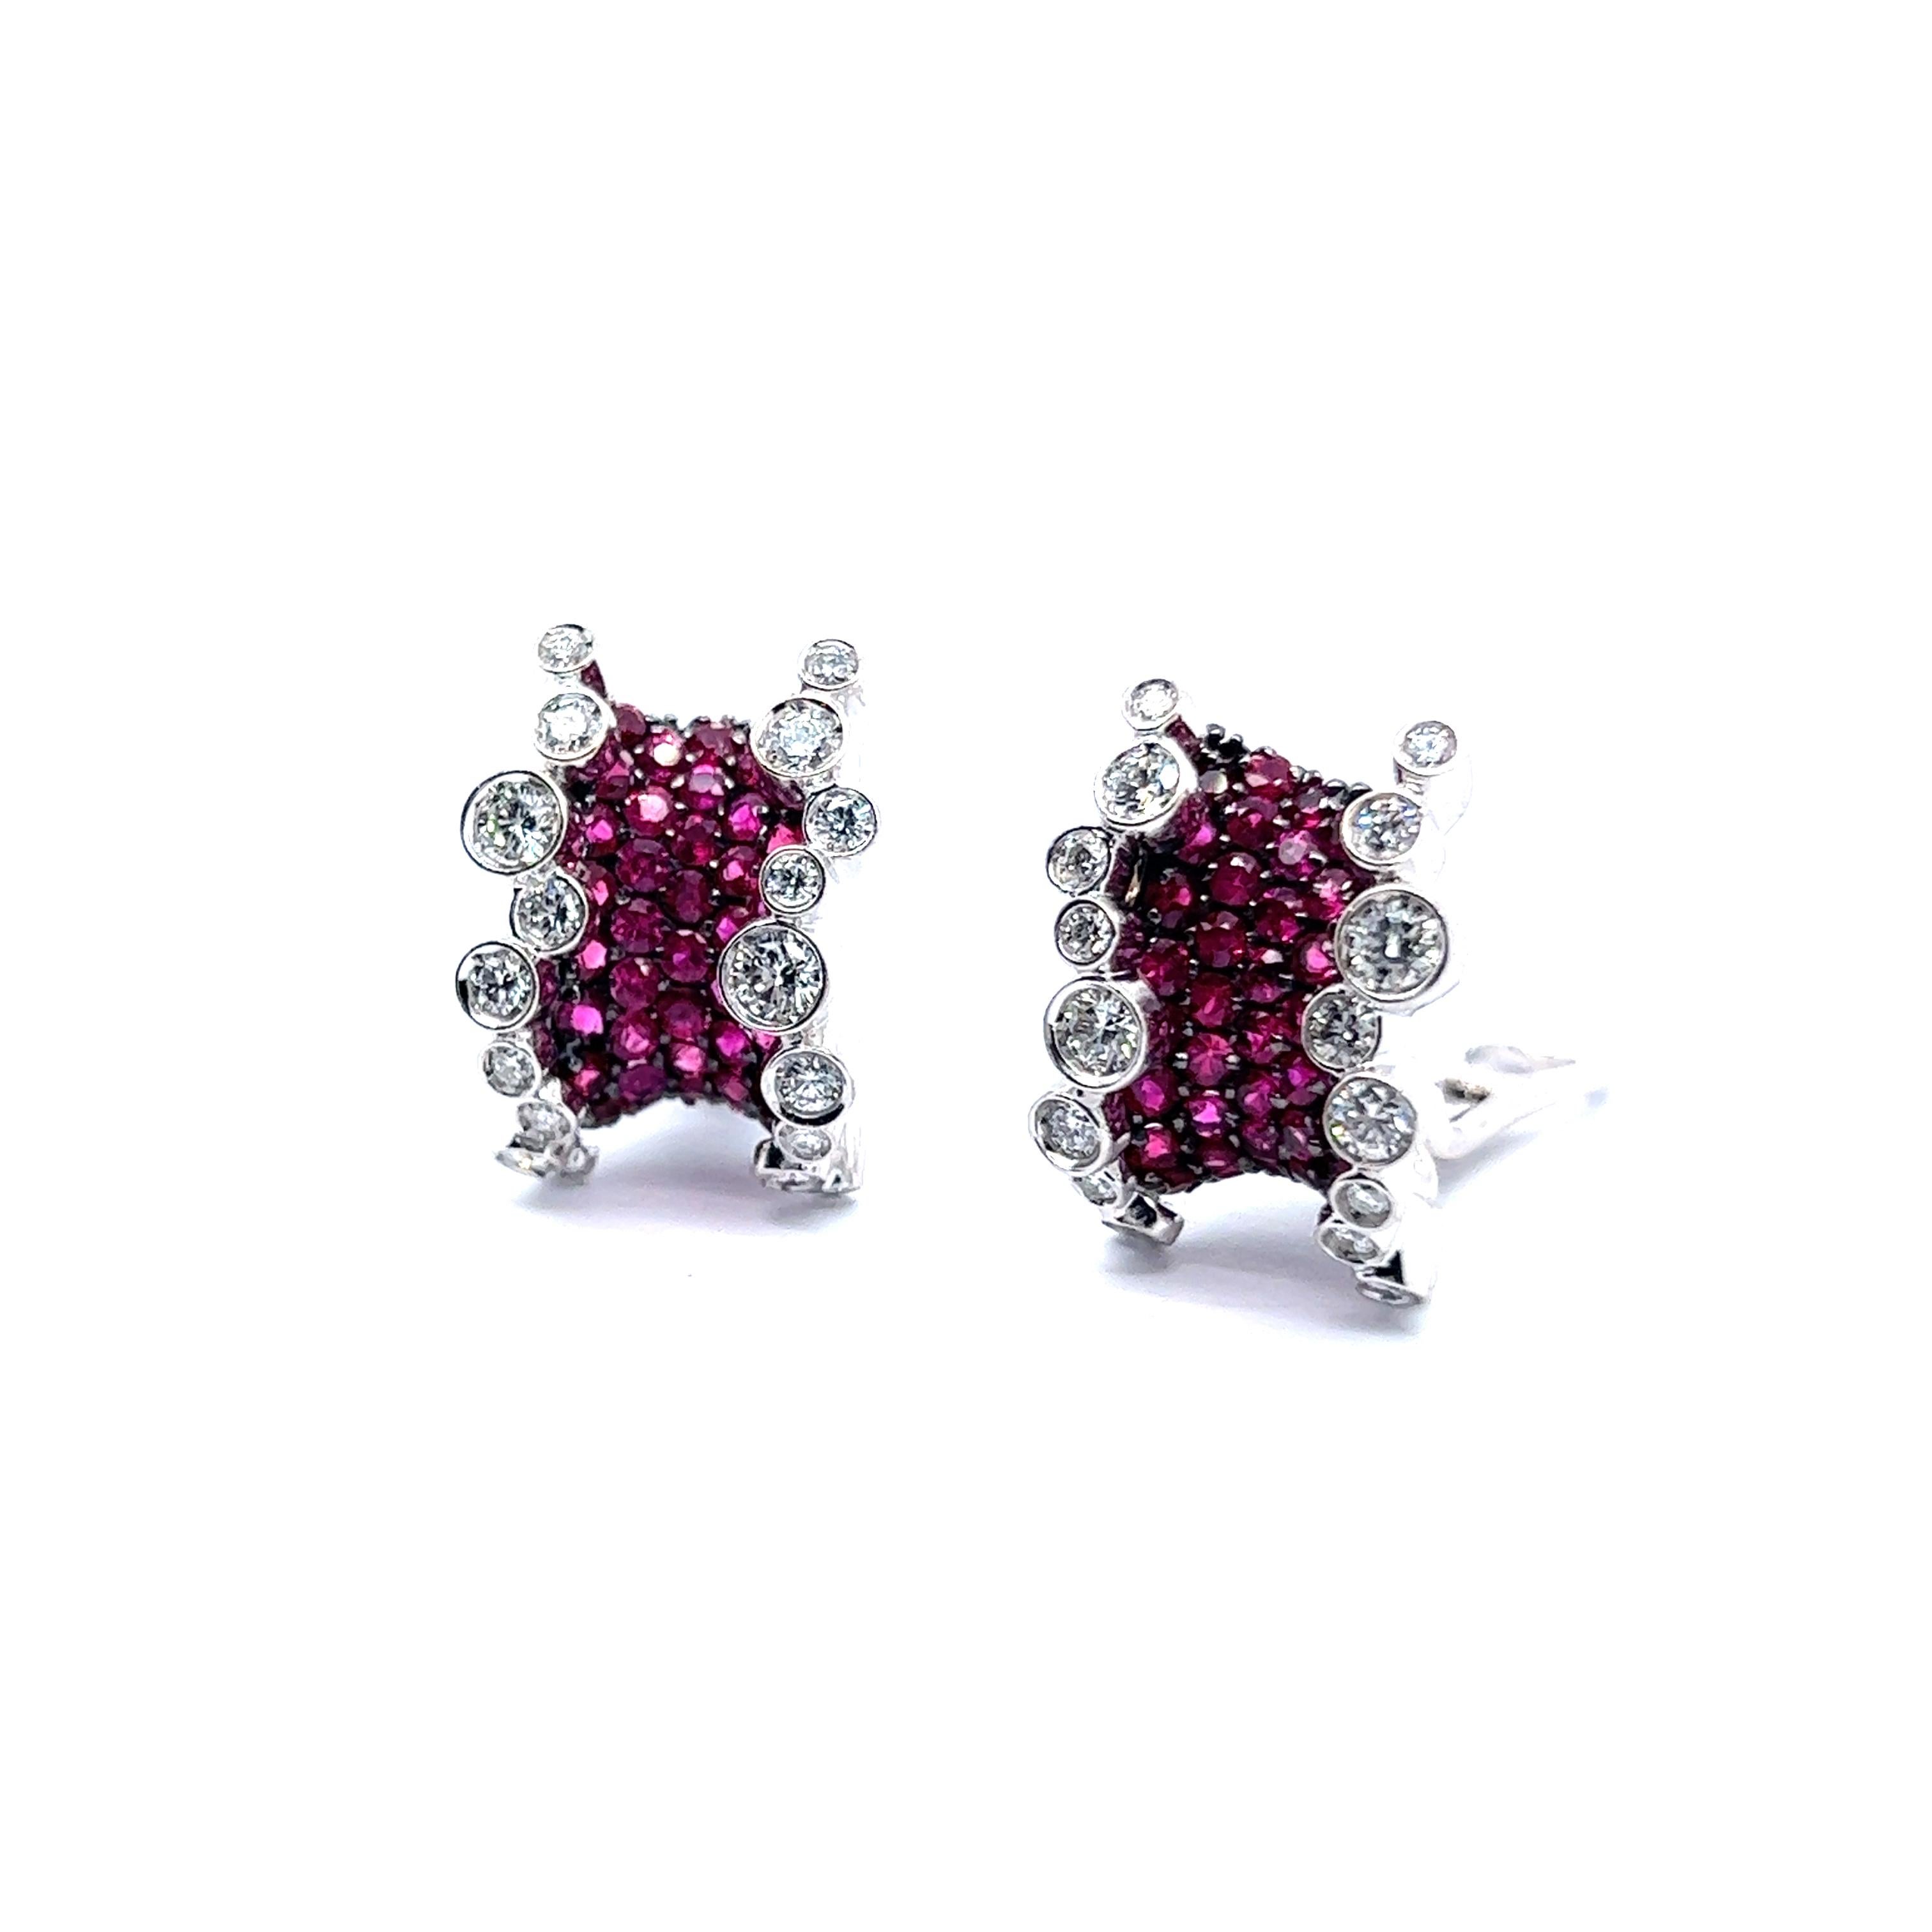 An exquisite pair of earrings with rubies and diamonds in 18 Karat white gold. These beauties are a true testament to luxury and artistry, resembling two exotic fruits or candies captured in the form of jewelry. 

Each earring boasts a luscious